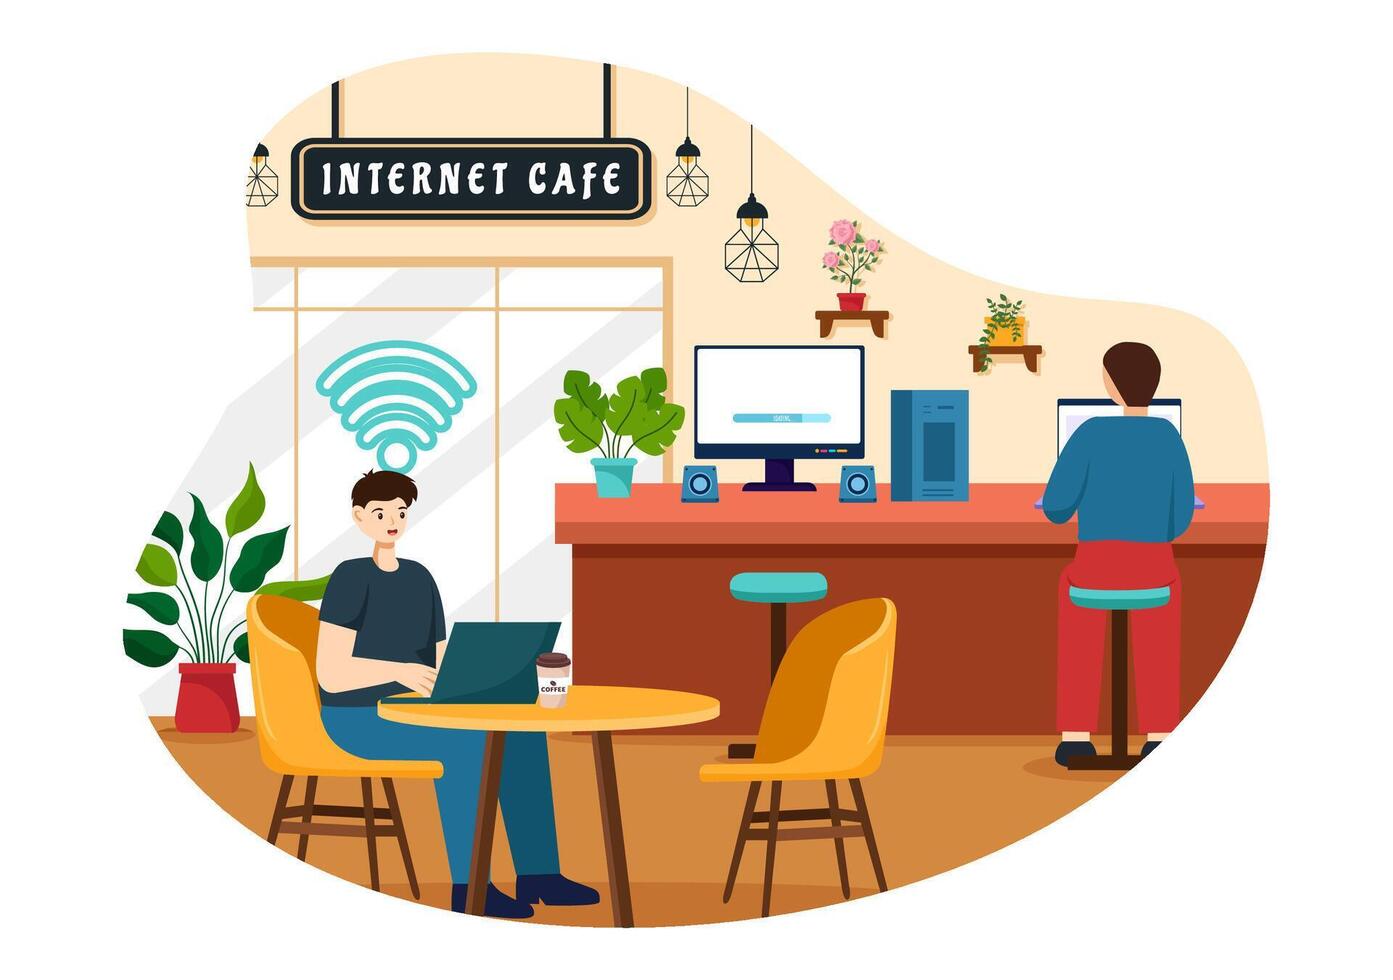 Internet Cafe Vector Illustration with Building for Young People Playing Games, Workplace use a Laptop, Talking and Drinking in Flat Background